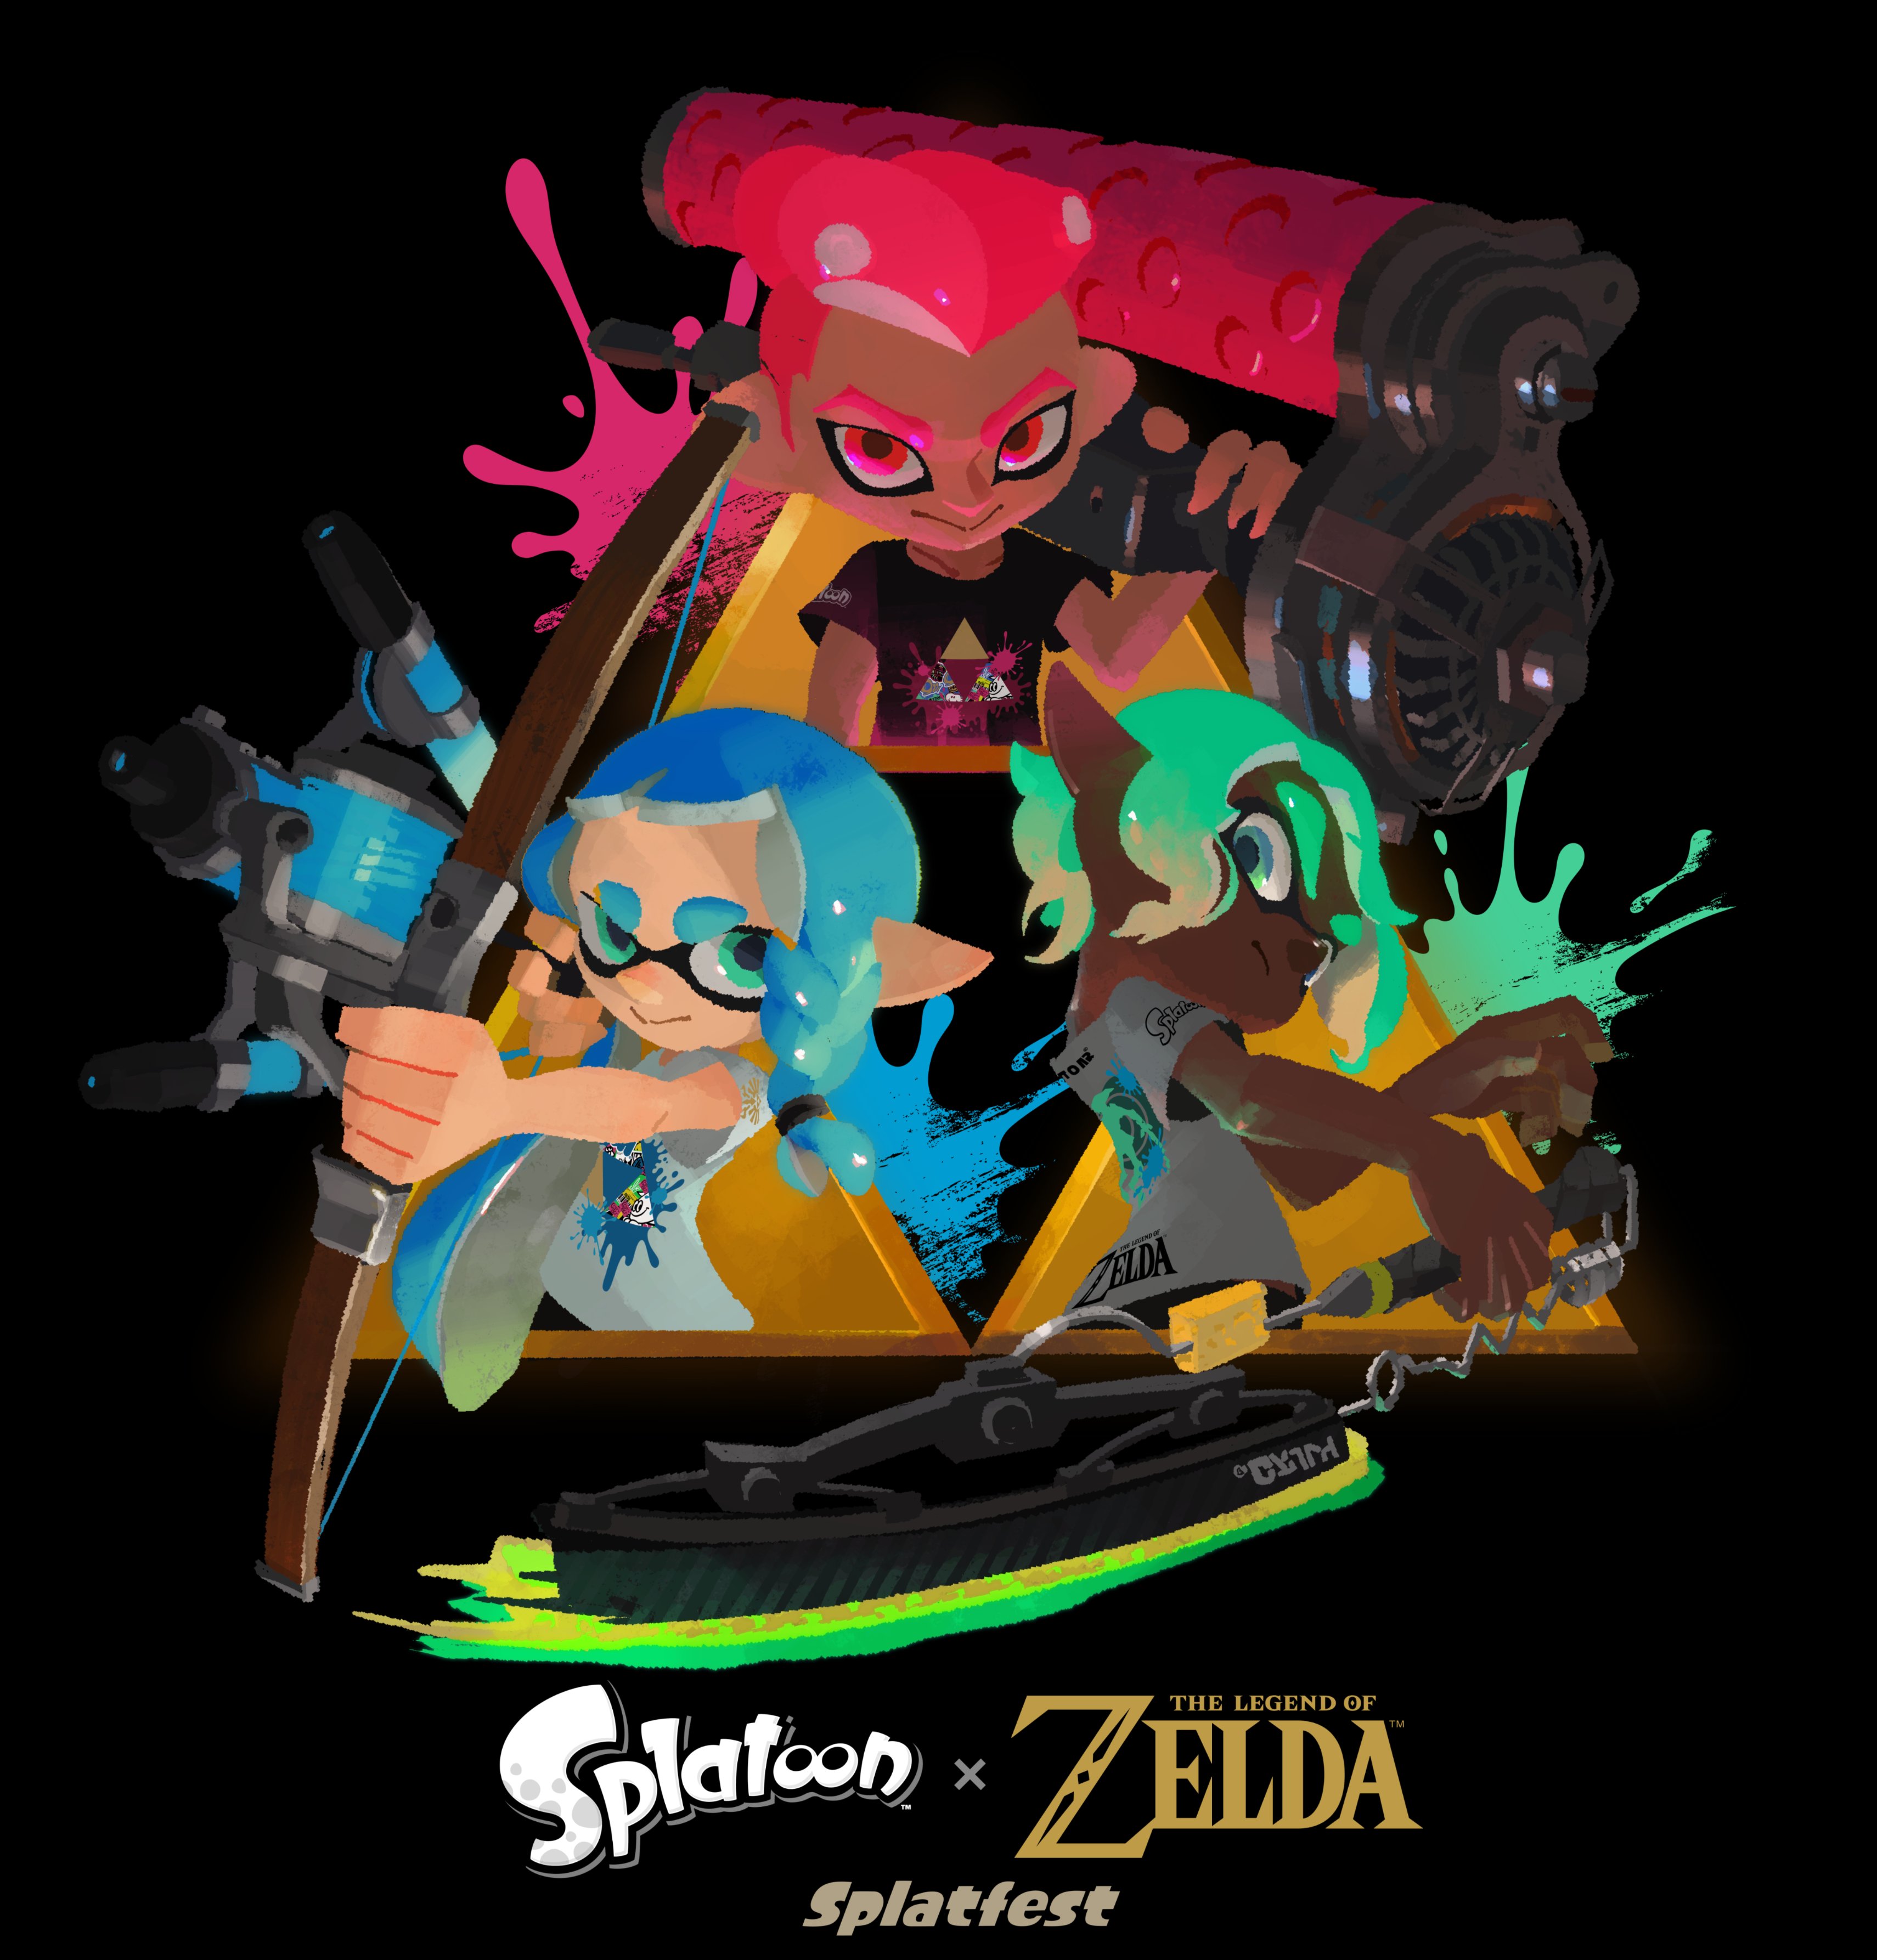 Splatoon 3 Splatfests schedule, themes, results, and other details